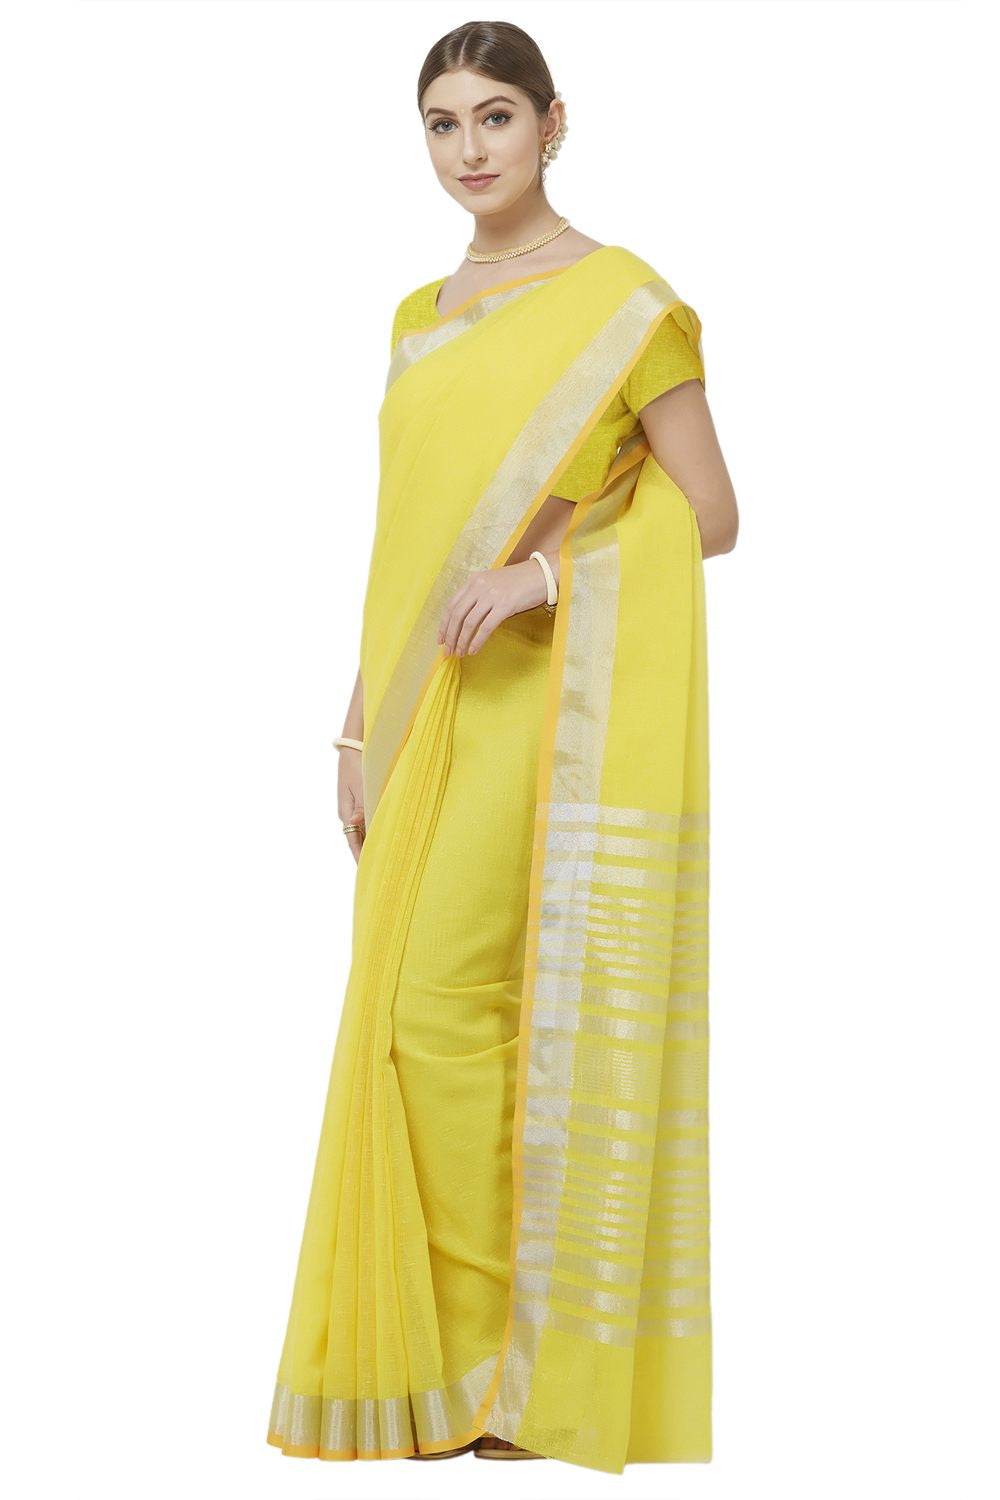 Buy Latest Sari Collection Online In India